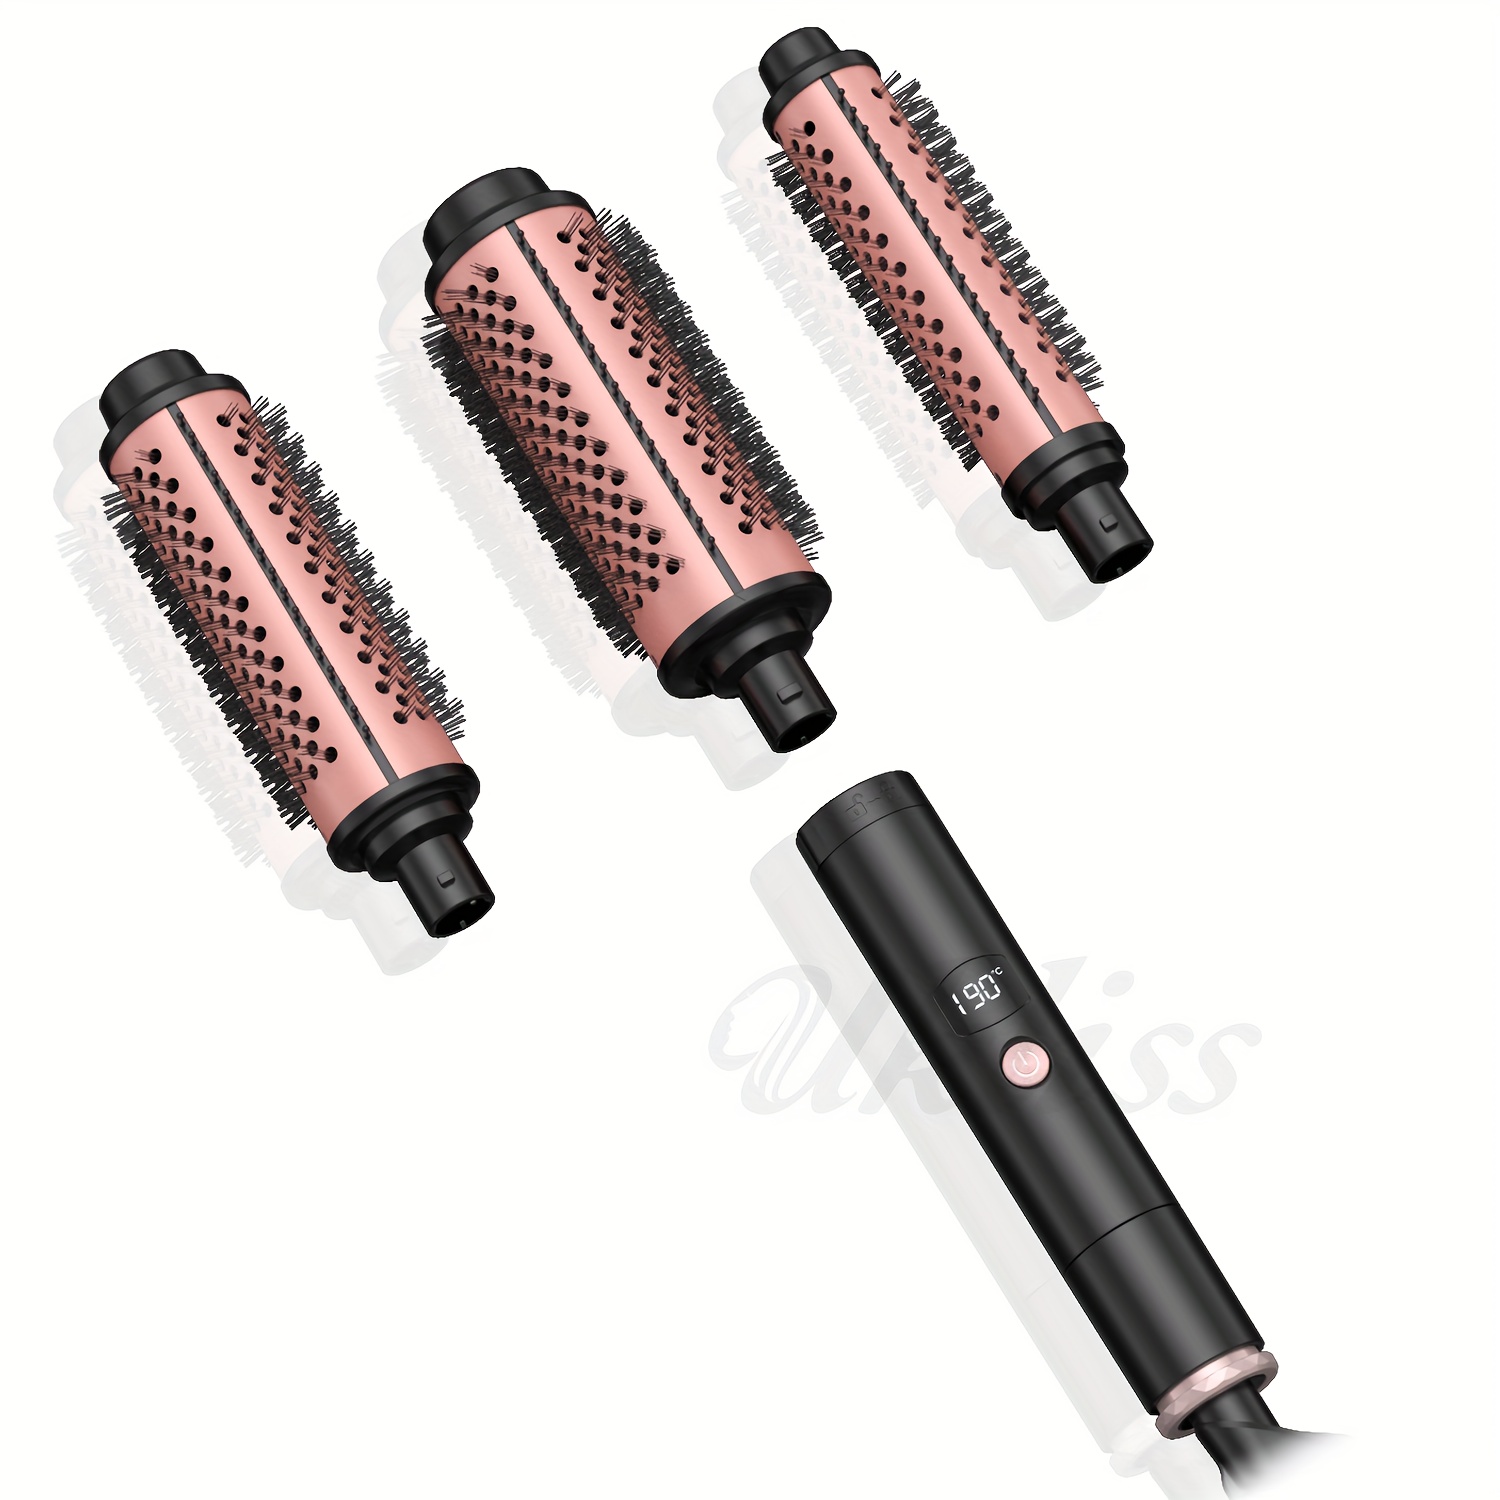 

Hot Air Comb, Hair Curler Comb, Multifunctional Hair Dryer 1 Step Hair Styler, Electric Hair Dryer Brush, Gifts For Women, Mother's Day Gift